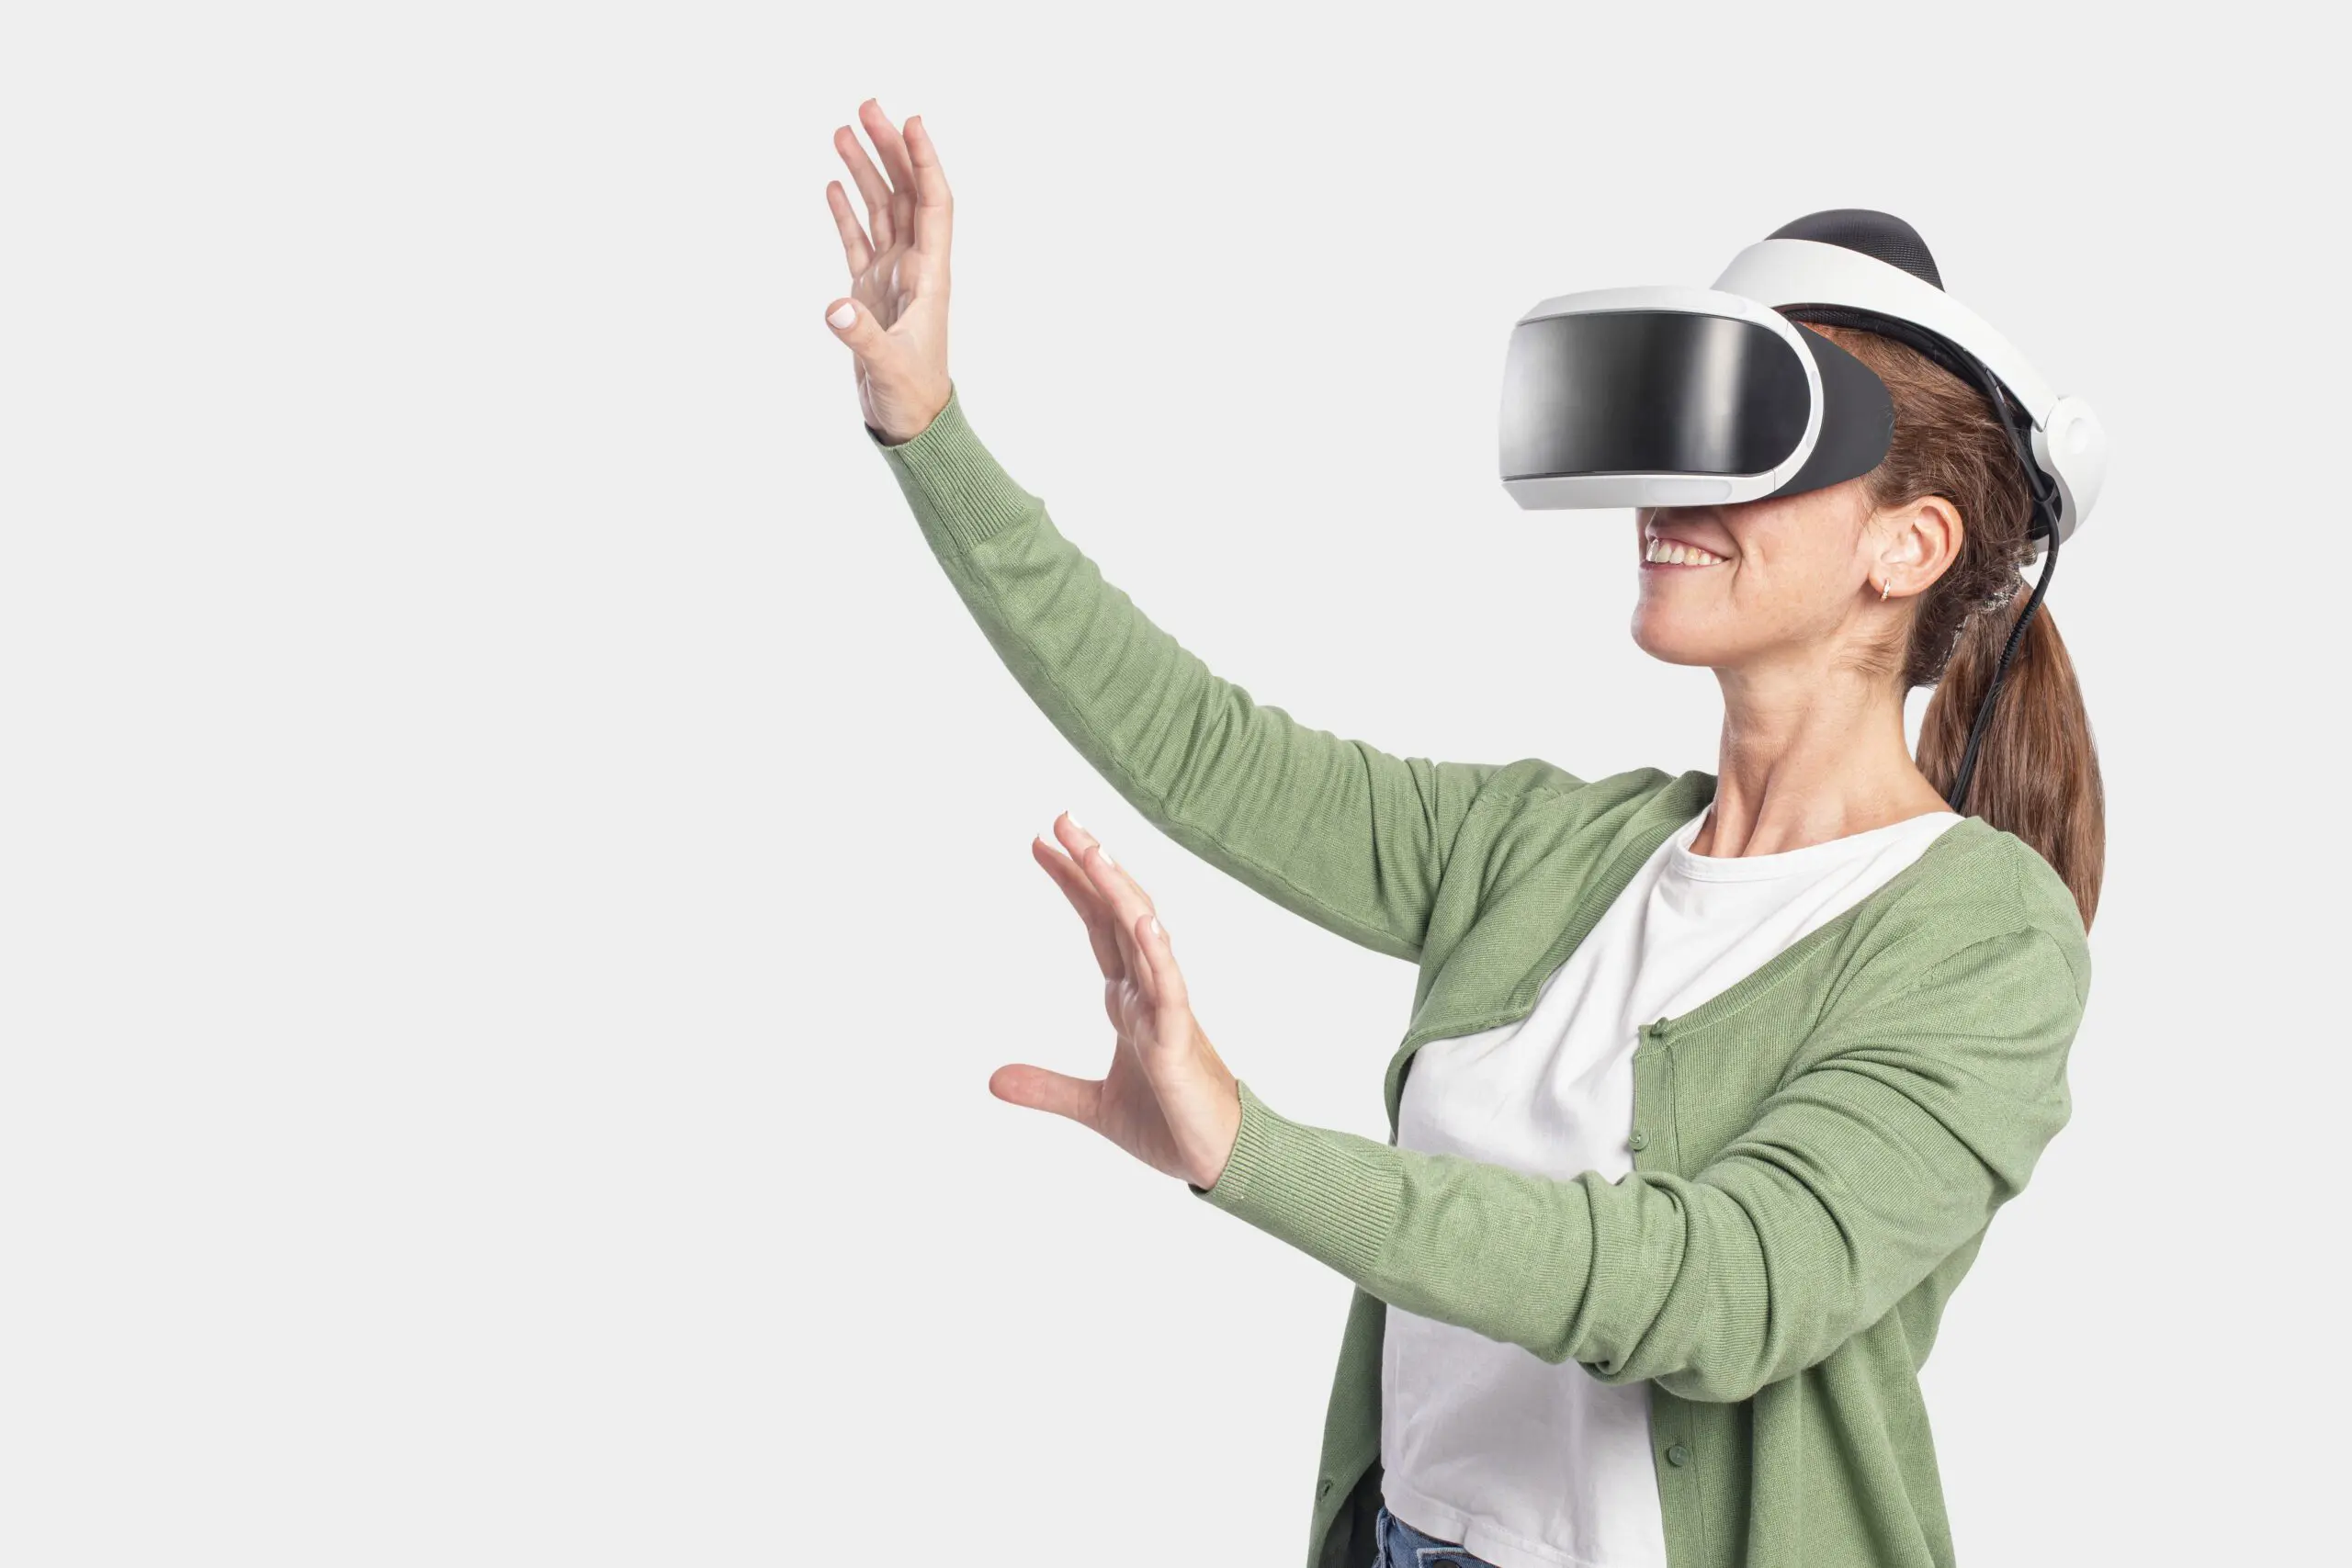 Woman Experiencing Vr Entertainment Technology Scaled